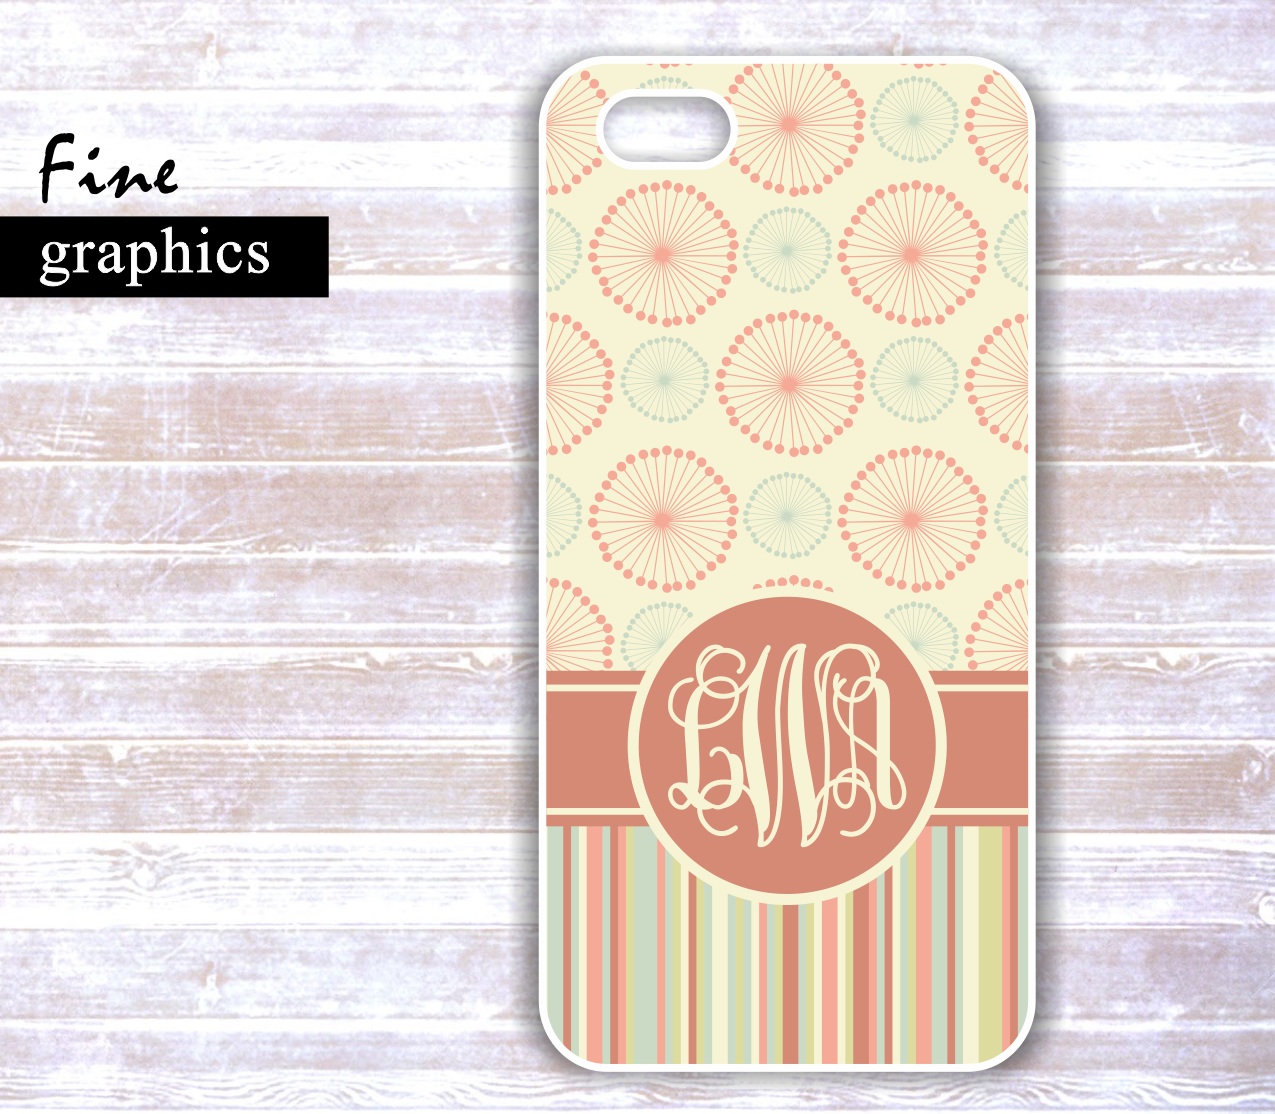 Personalized Iphone - Monogrammеd Iphone Hard Cover - Samsung Galaxy Case - Custom Iphone Case